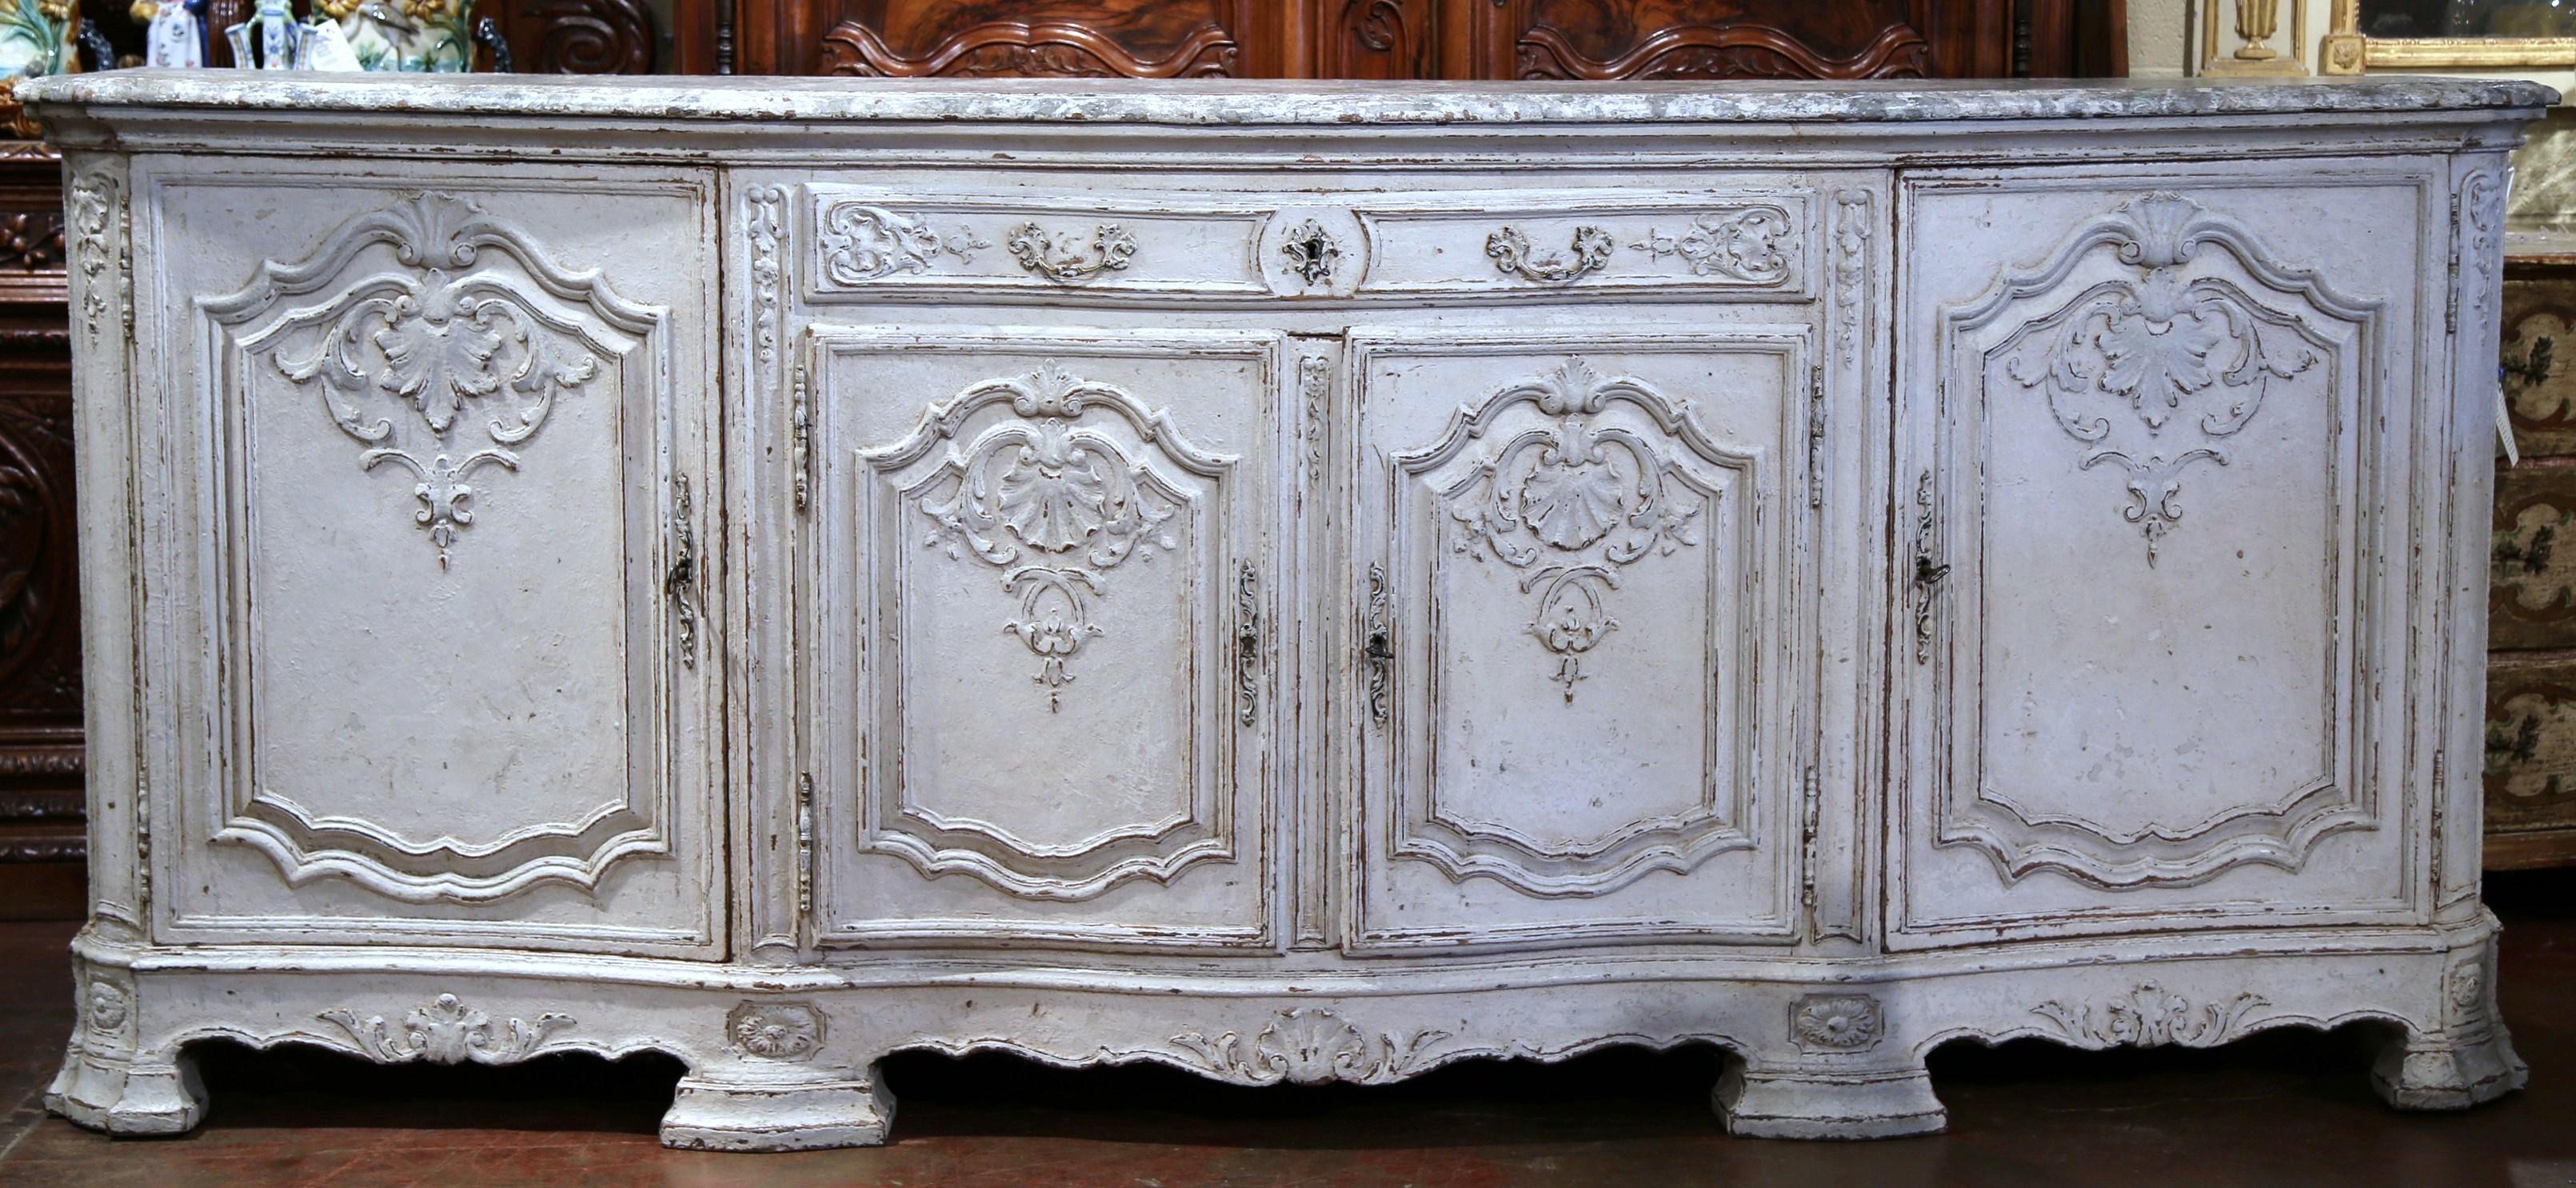 Place this elegant antique gray painted enfilade in your dining room as a serving and storage piece. Crafted in Paris, France circa 1860, the Classic, French serpentine buffet sits on eight sturdy feet and features detailed shell motif carvings on